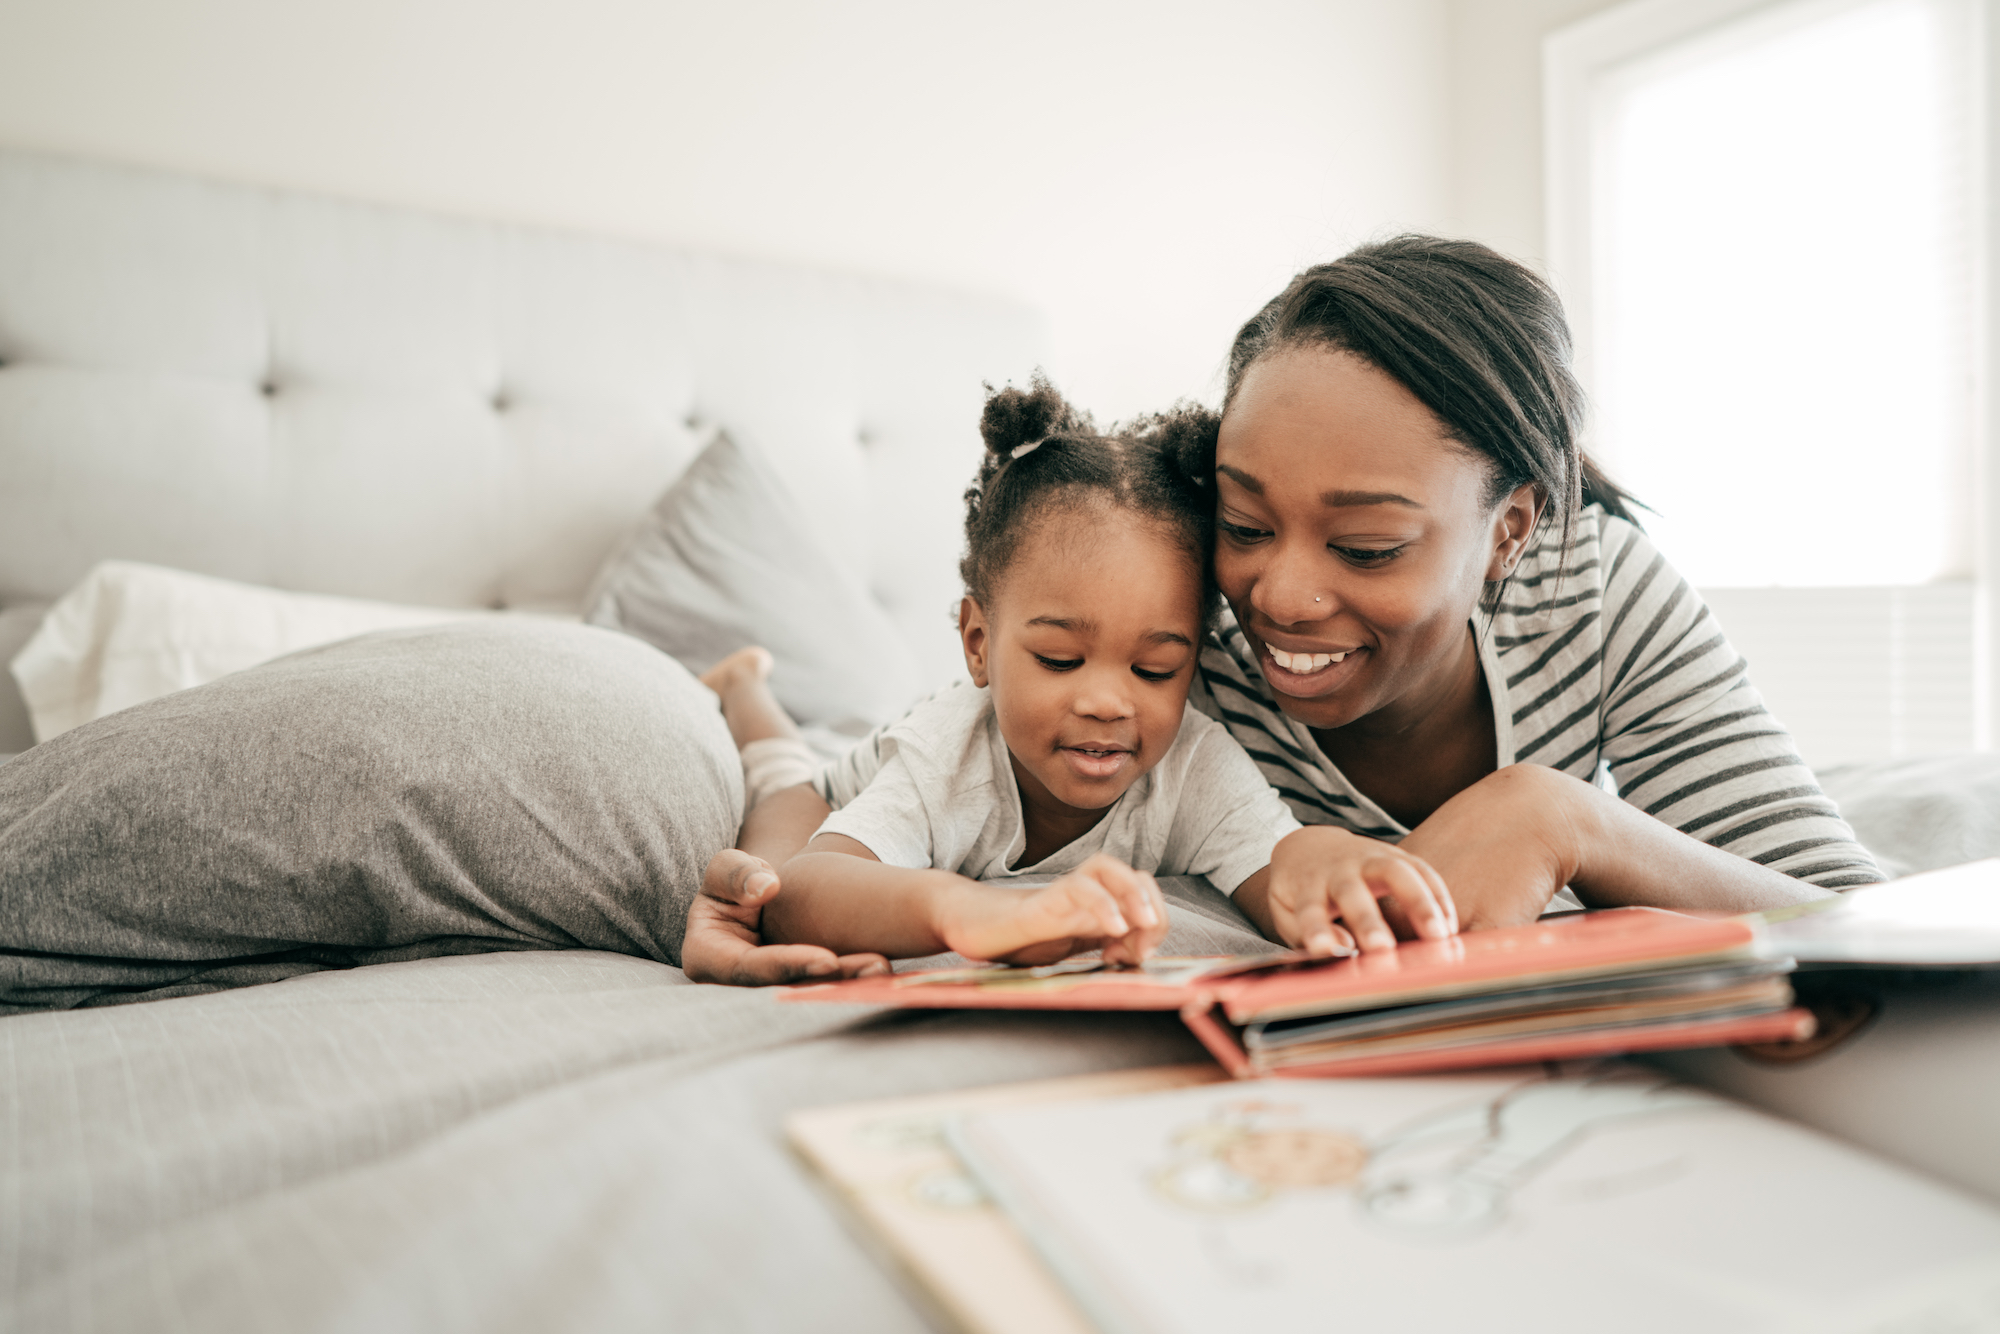 A mom and daughter reading in bed together.